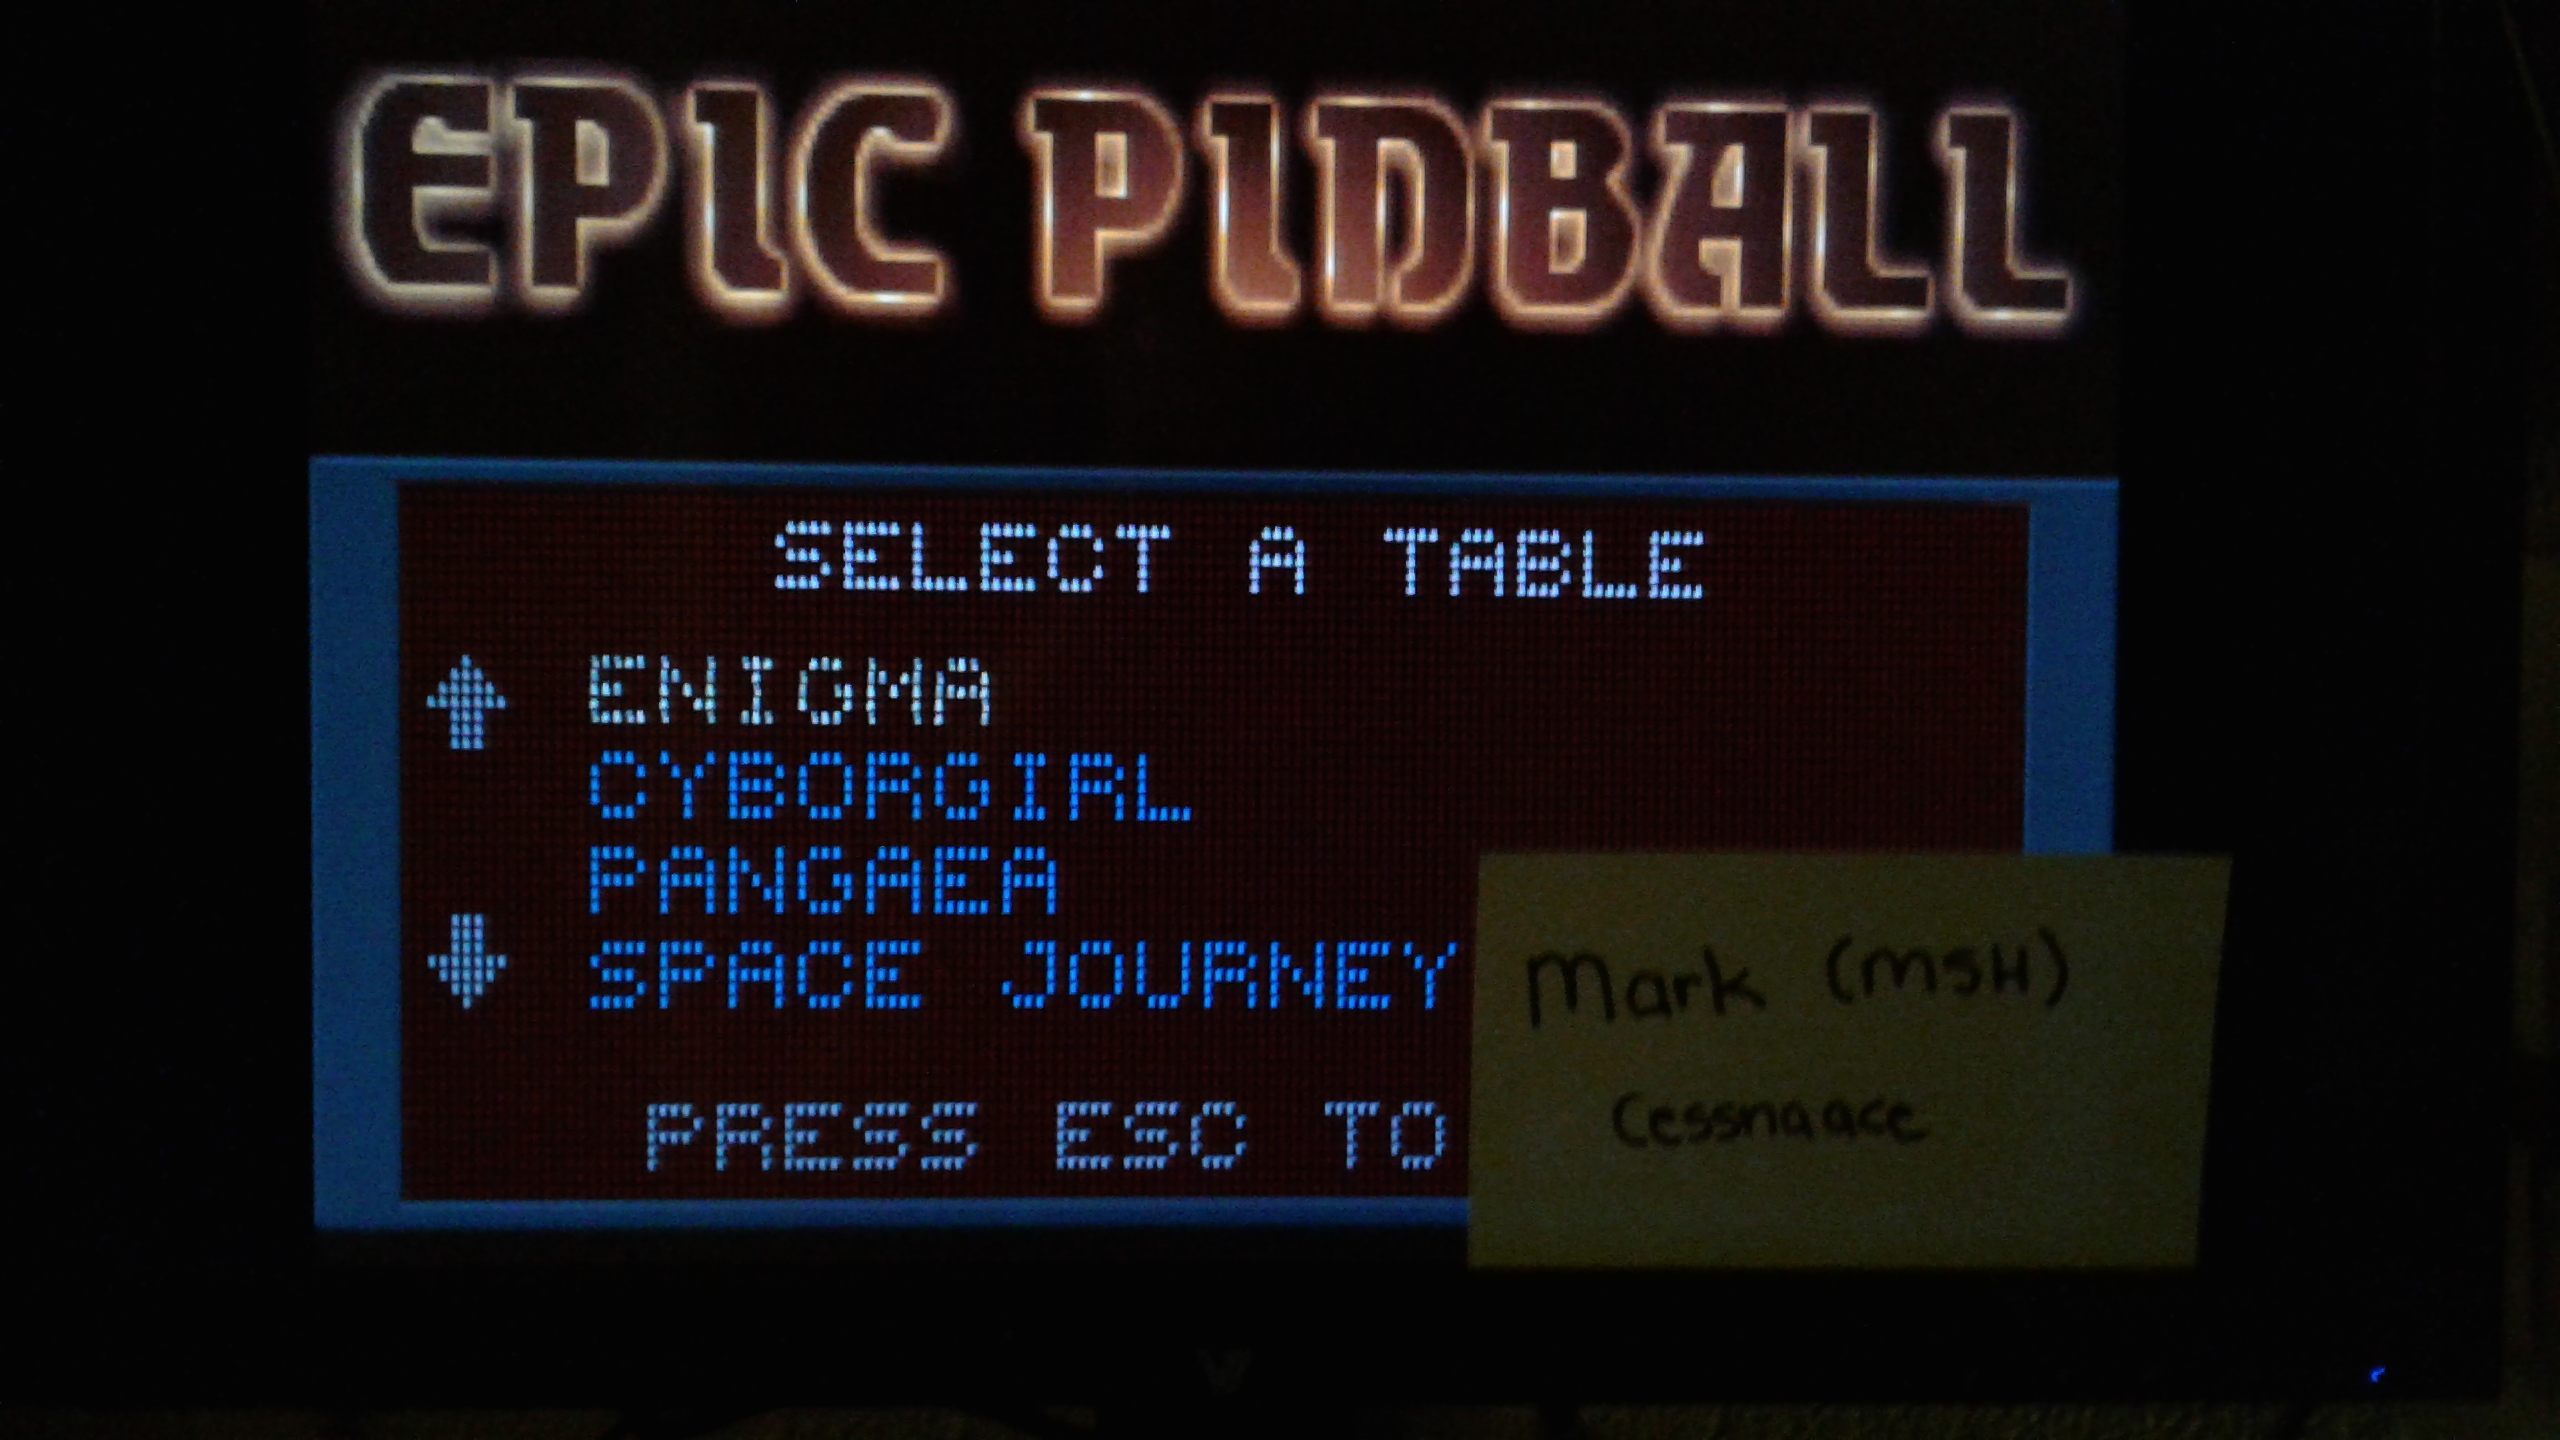 Mark: Epic Pinball: Enigma (PC Emulated / DOSBox) 49,780,000 points on 2019-05-13 01:01:29